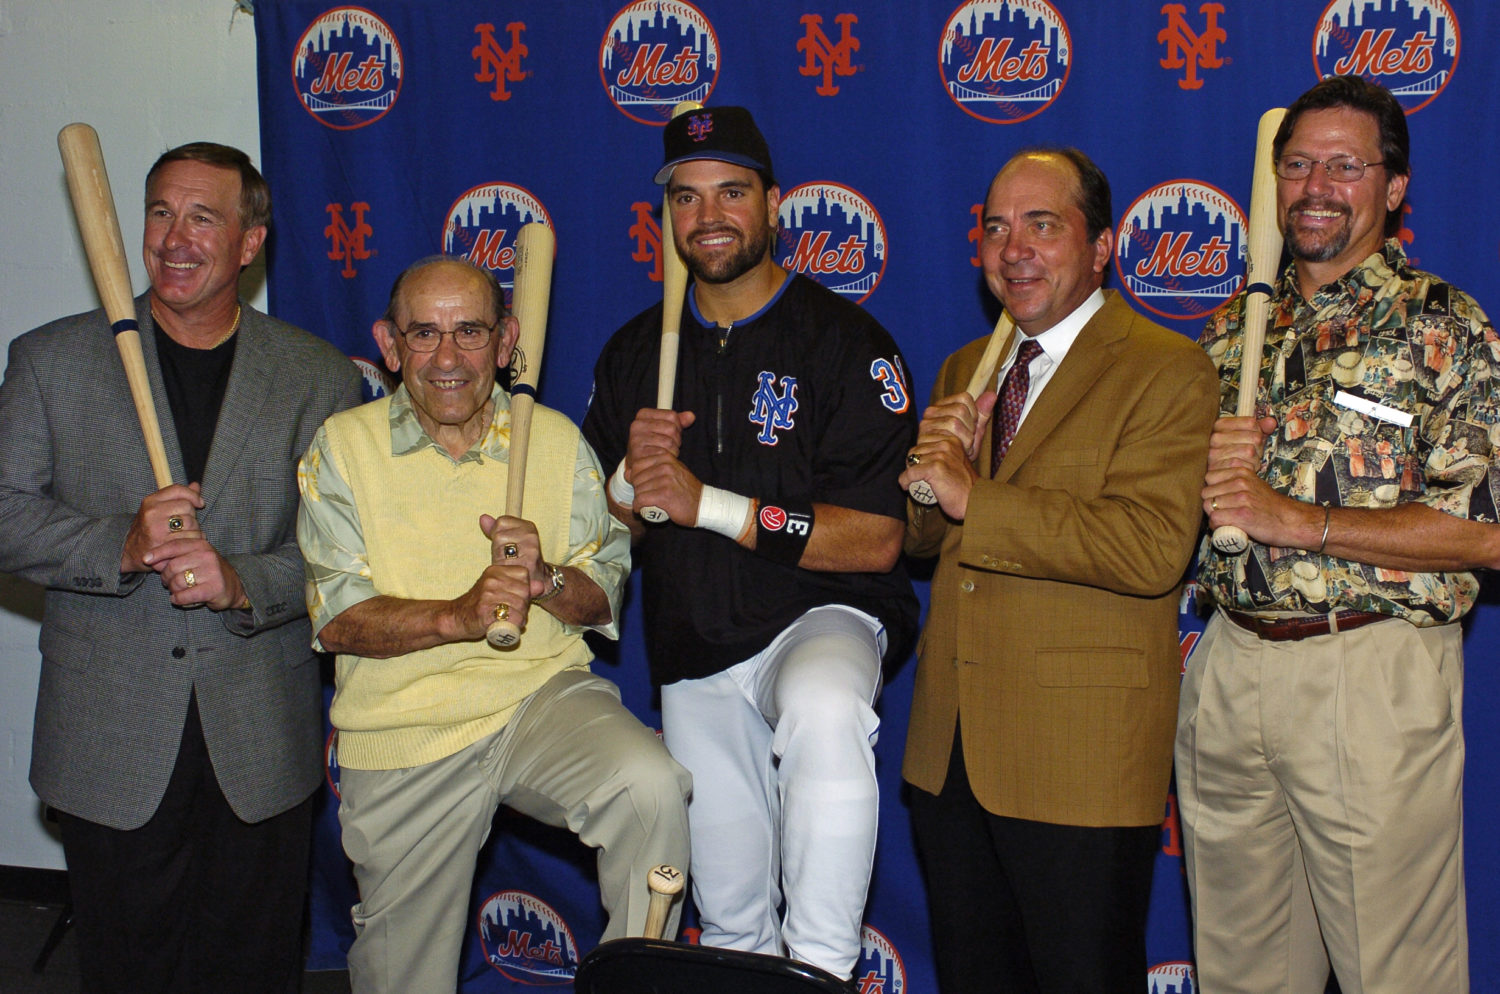 Mike Piazza Posing with Carlton Fisk, Gary Carter, Johnny Bench and Yogi Berra